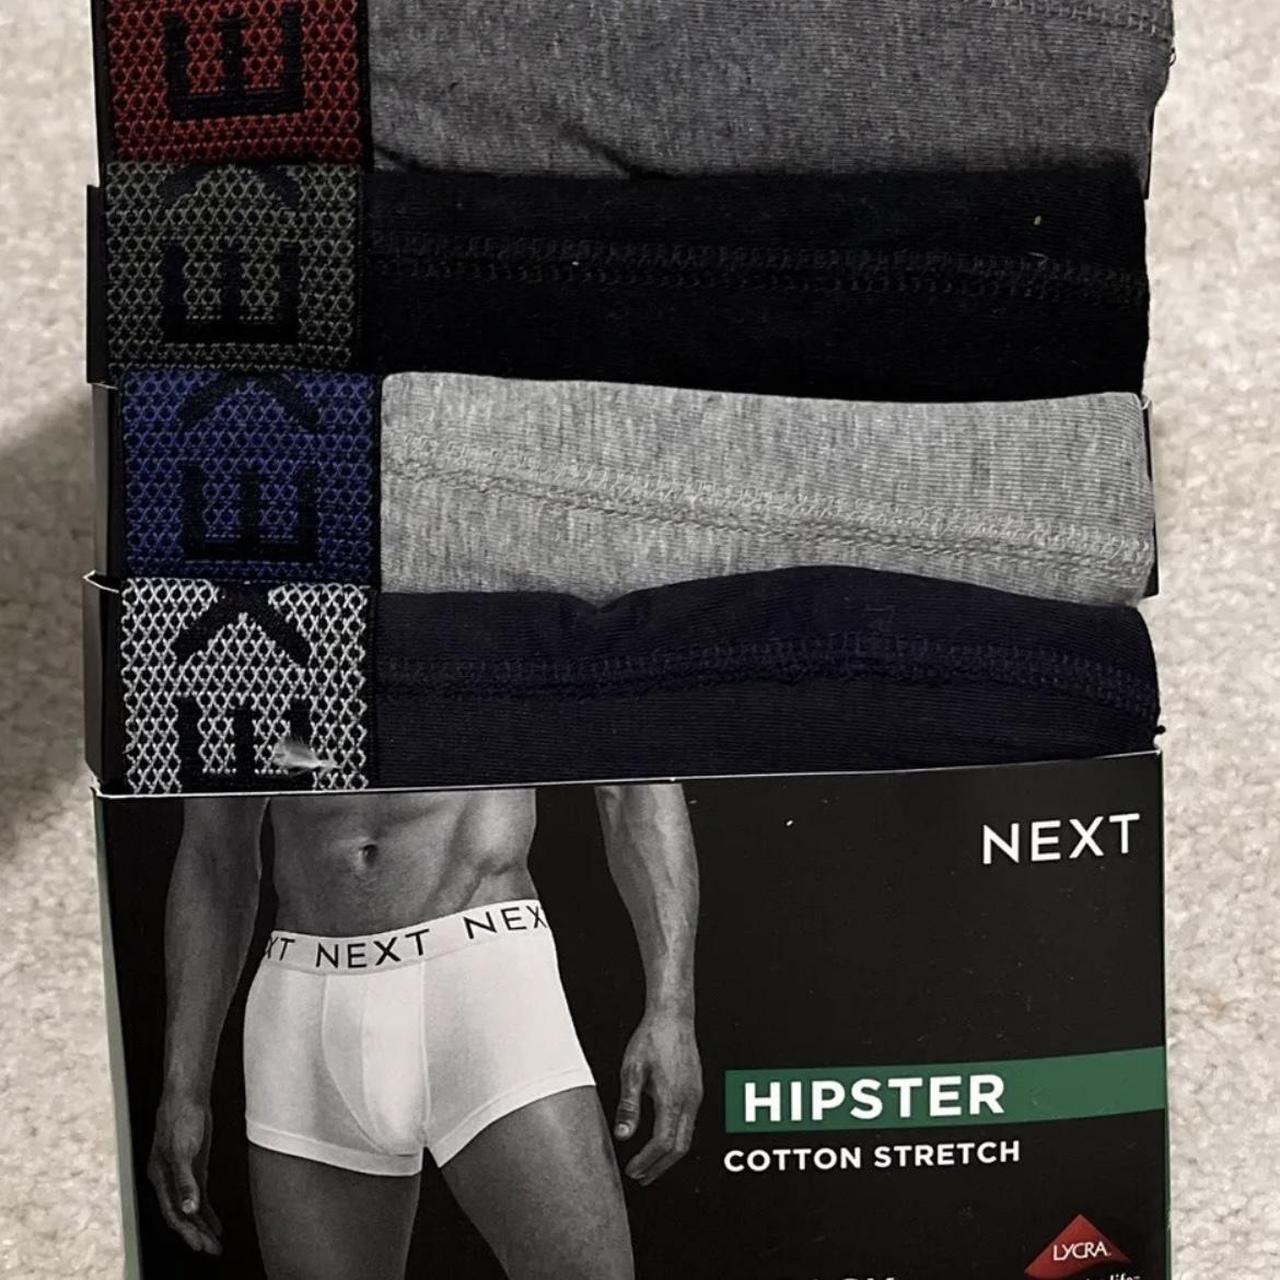 Black Hipster Boxers Pure Cotton 4 Pack